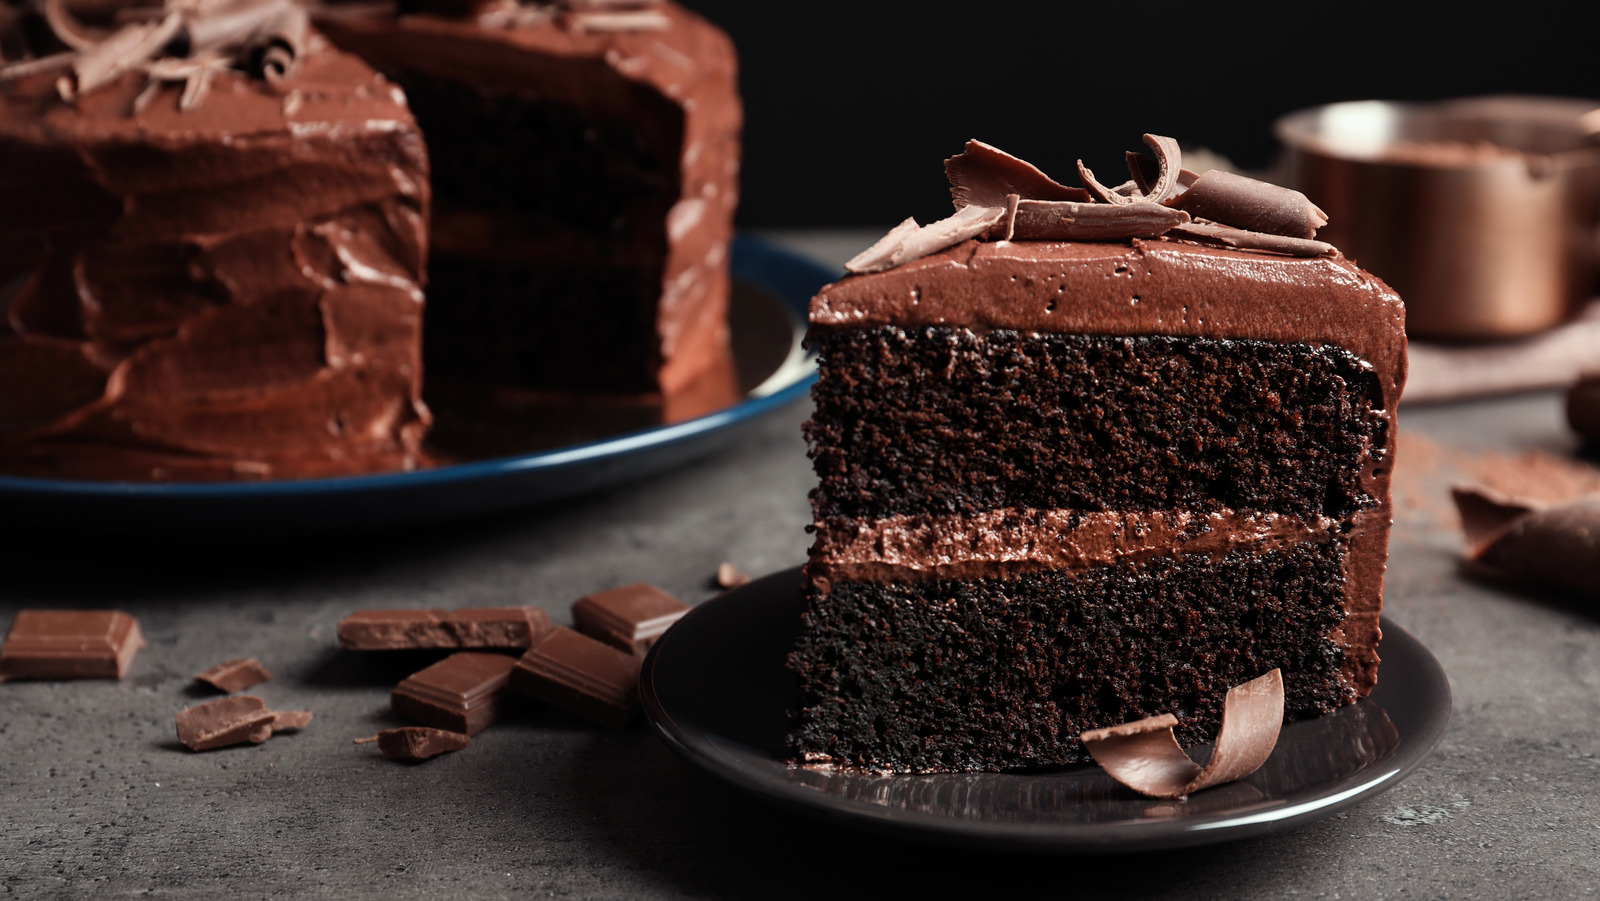 15 Ingredients To Revamp Your Classic Chocolate Cake